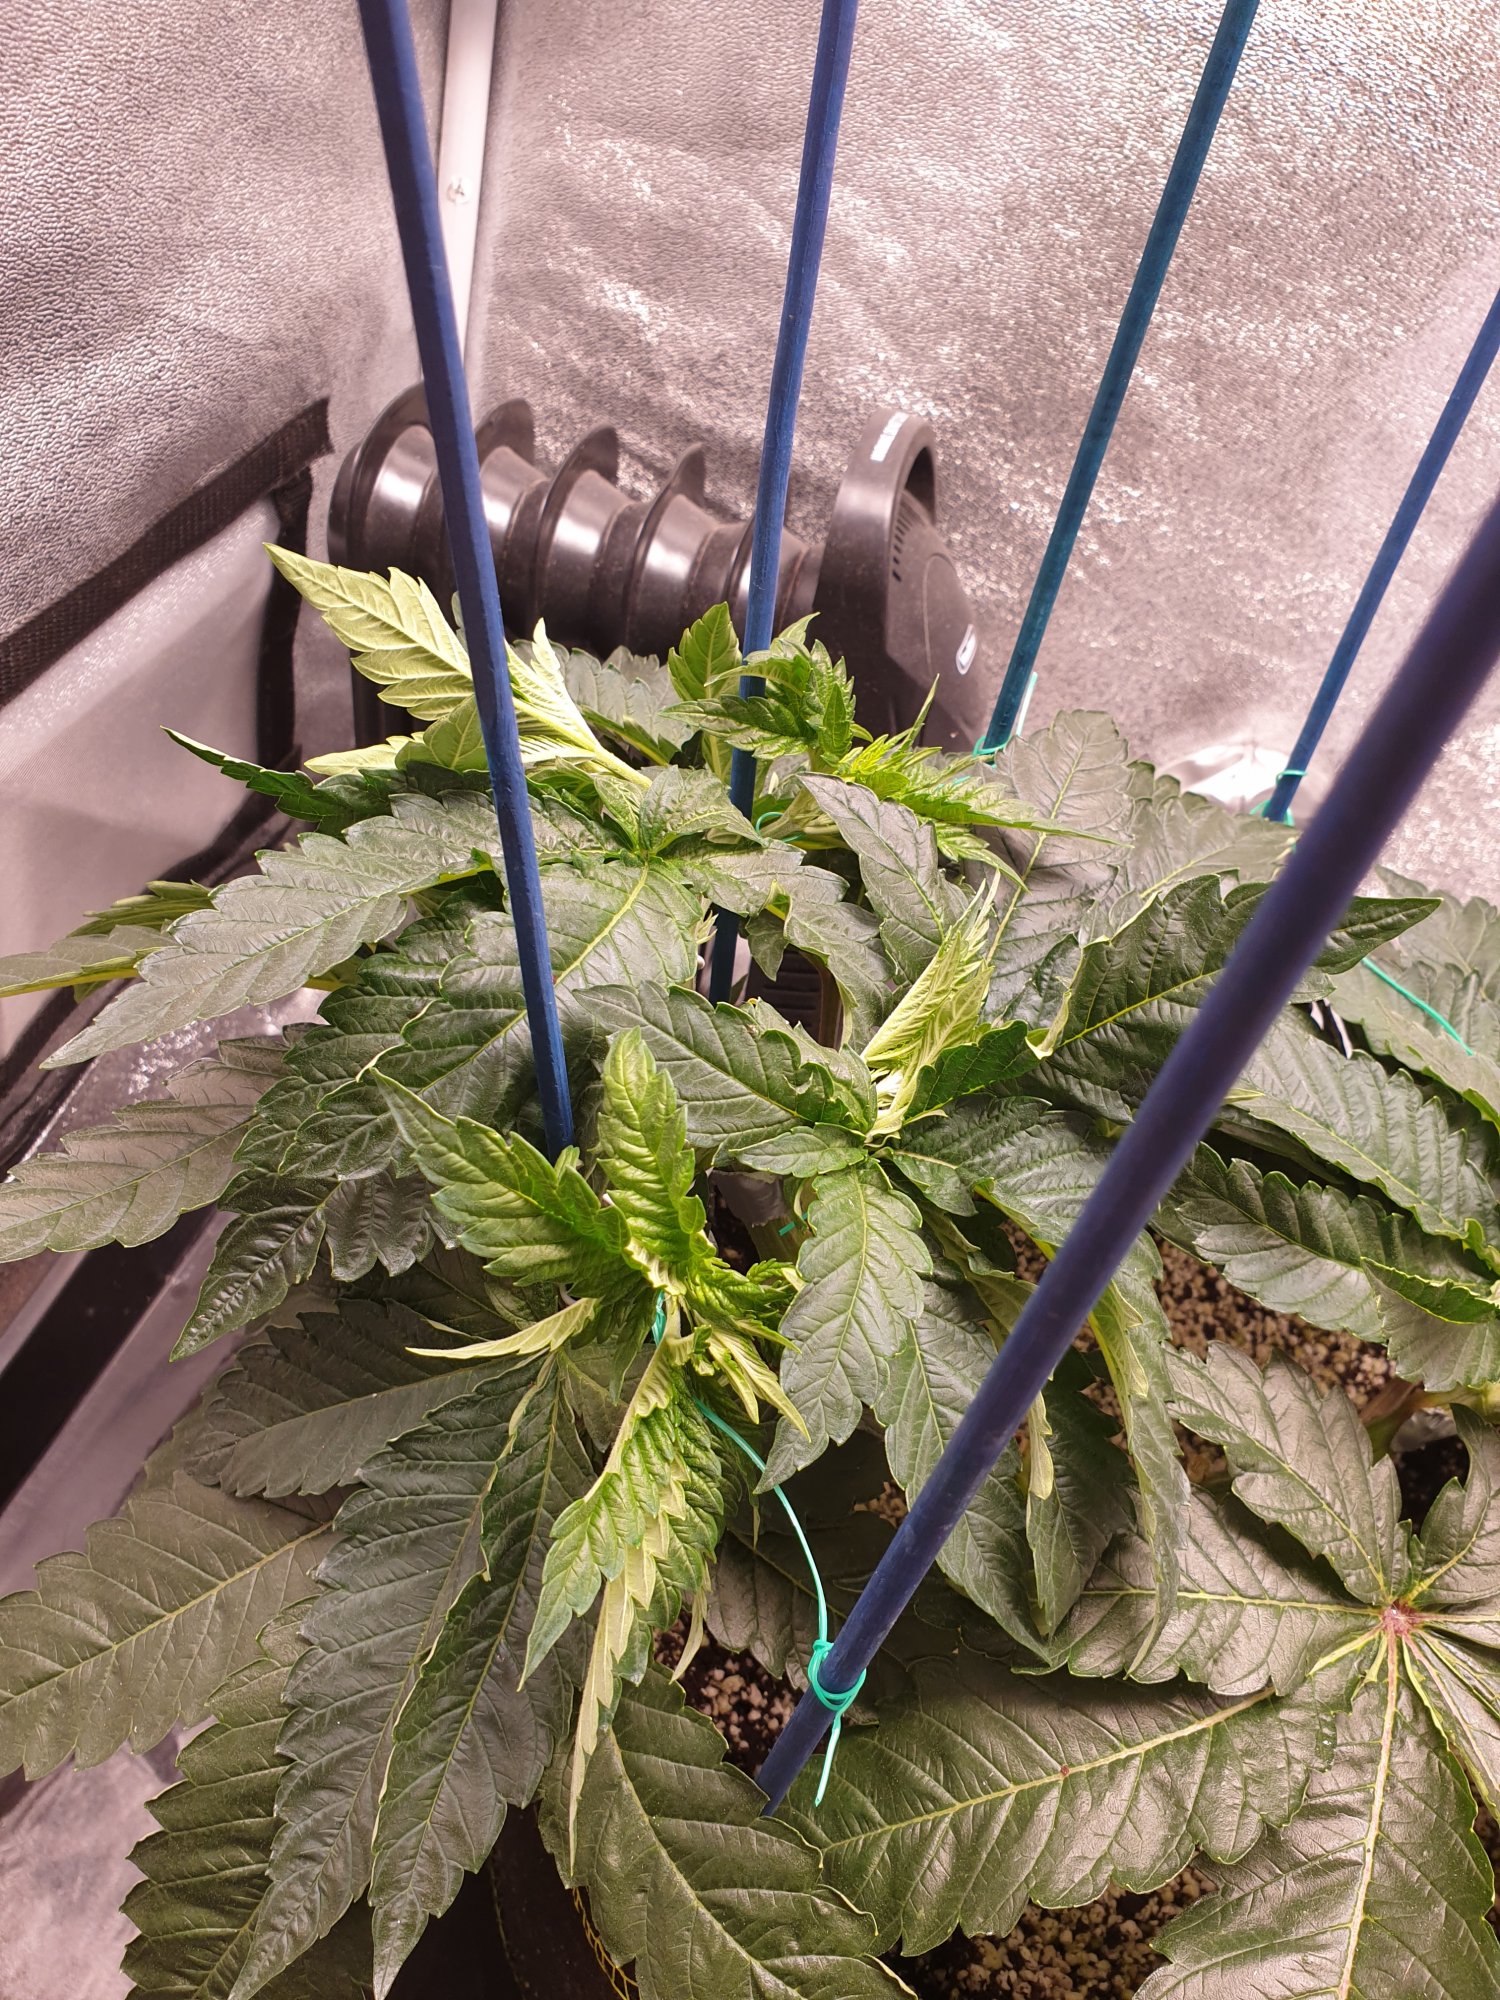 Help please new ish grower after some advice